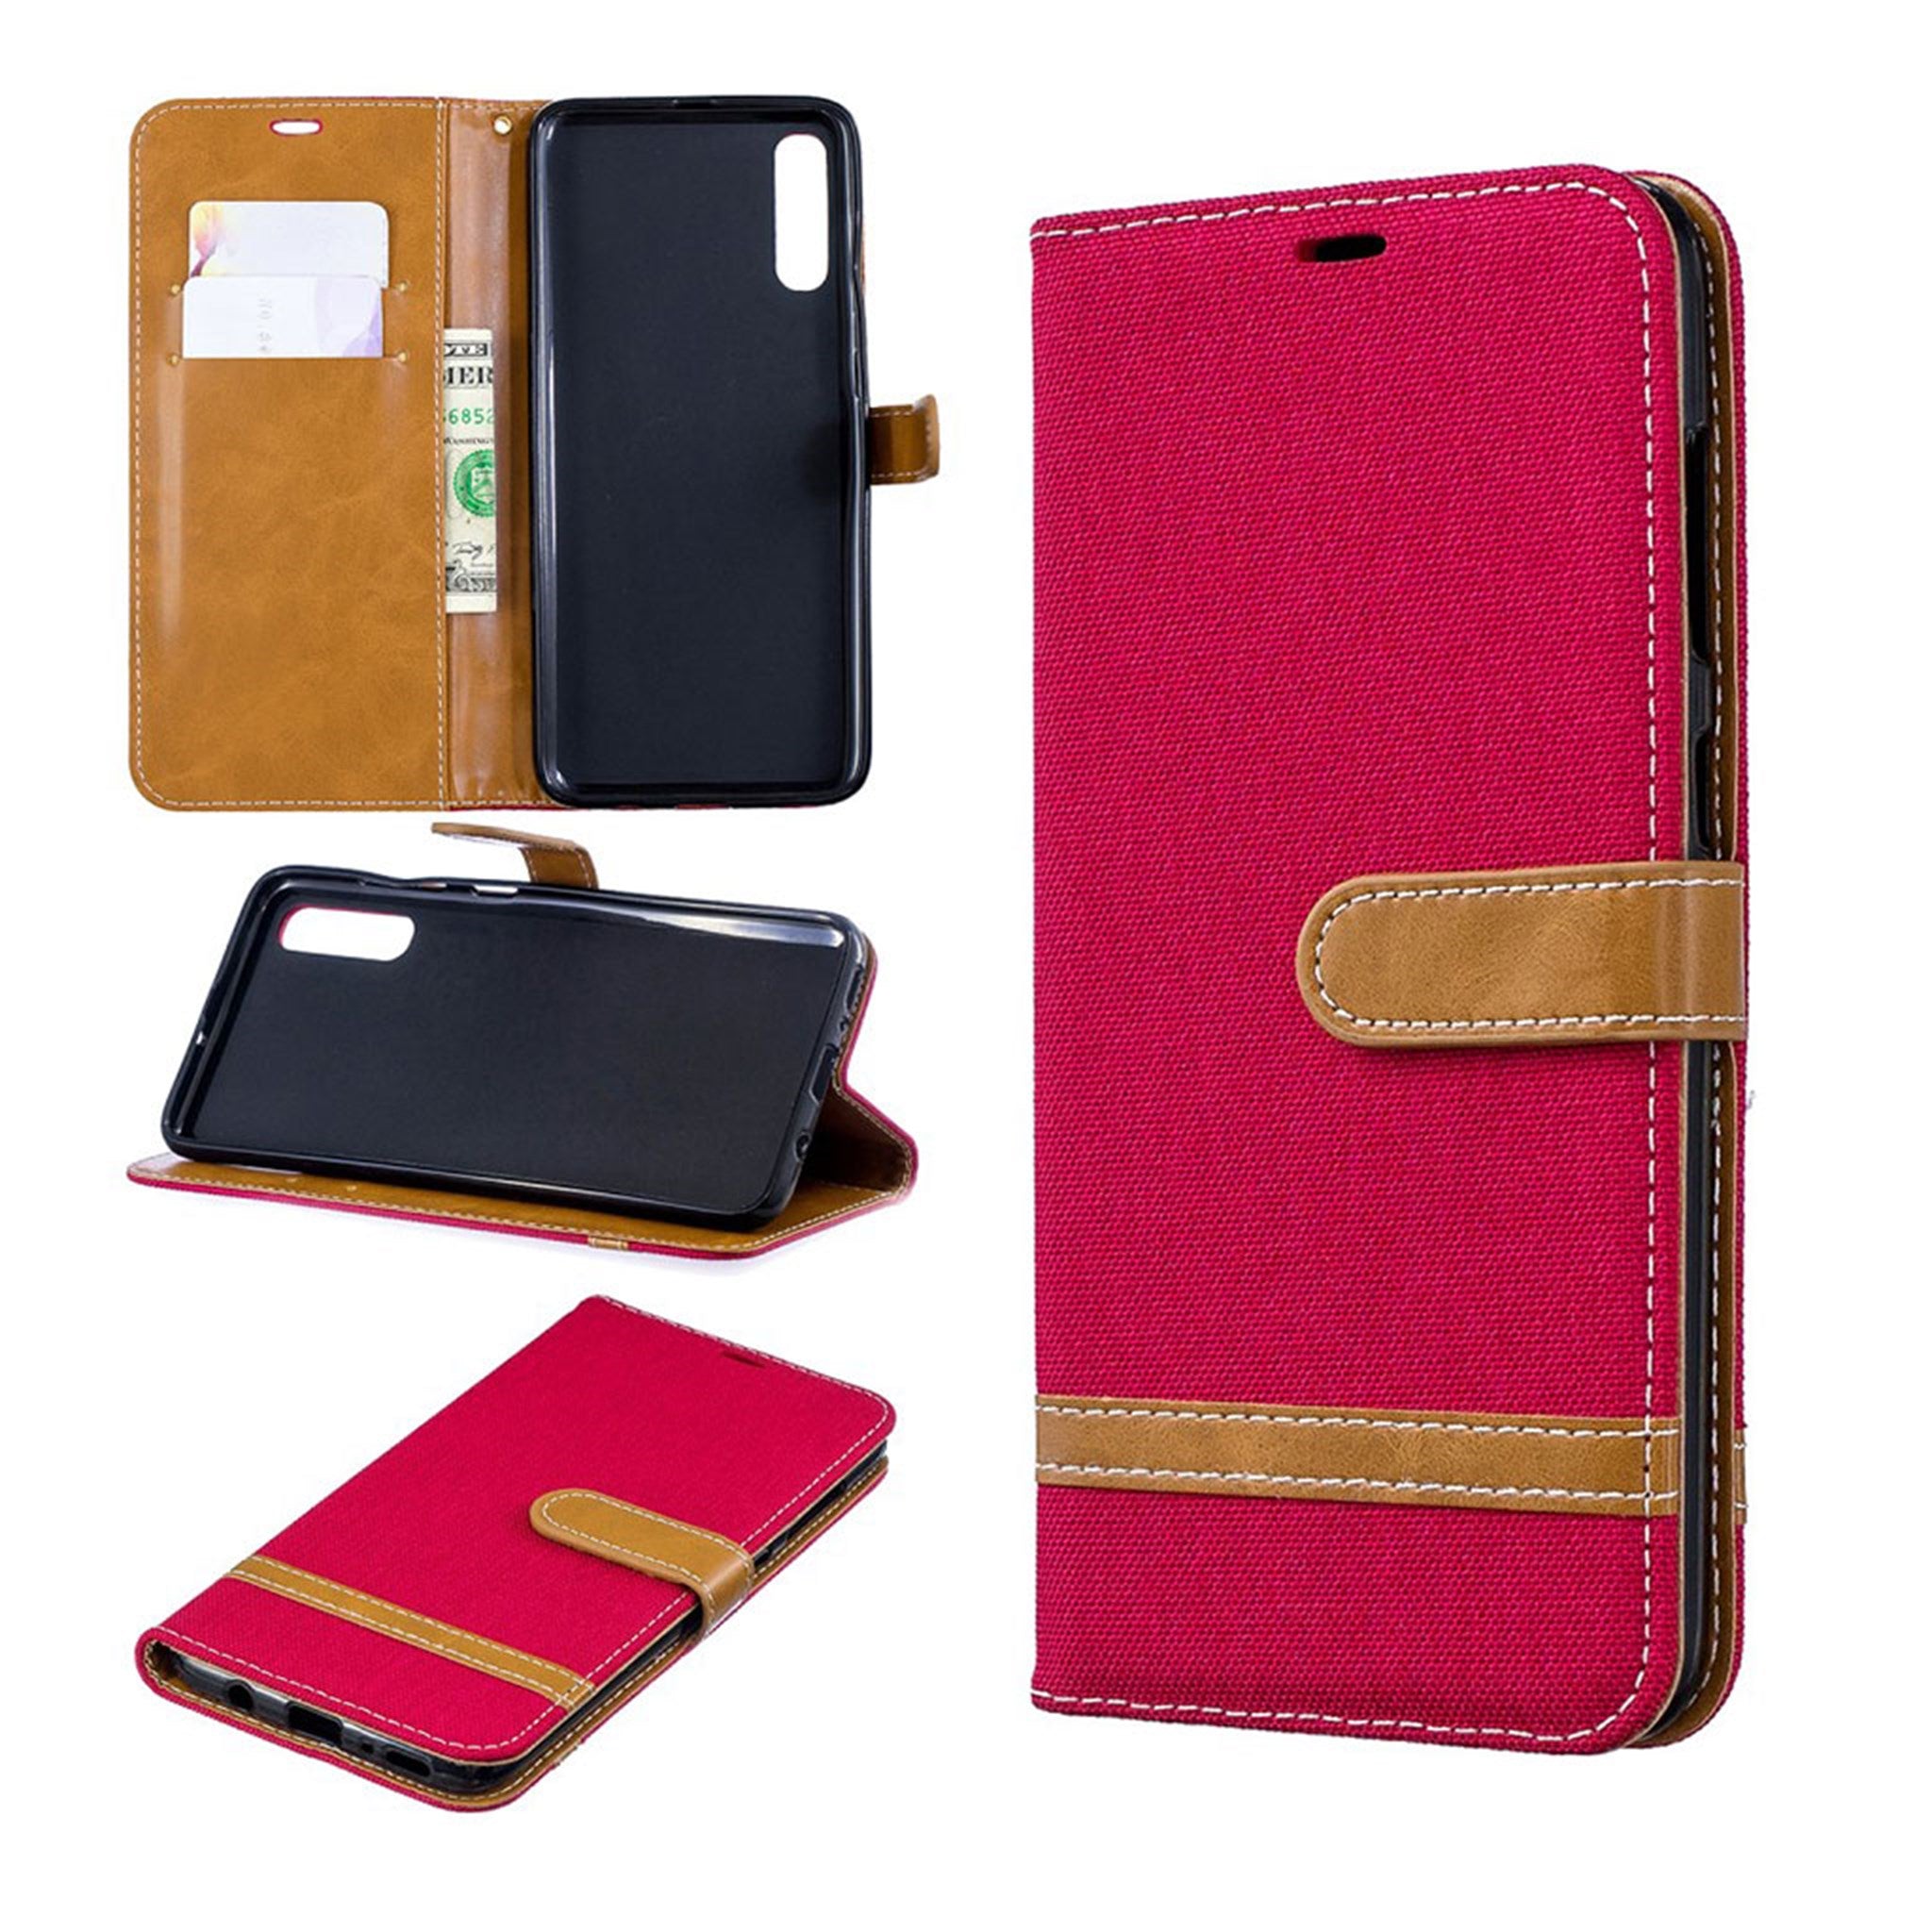 Samsung Galaxy A70 two-tone jeans leather case - Red